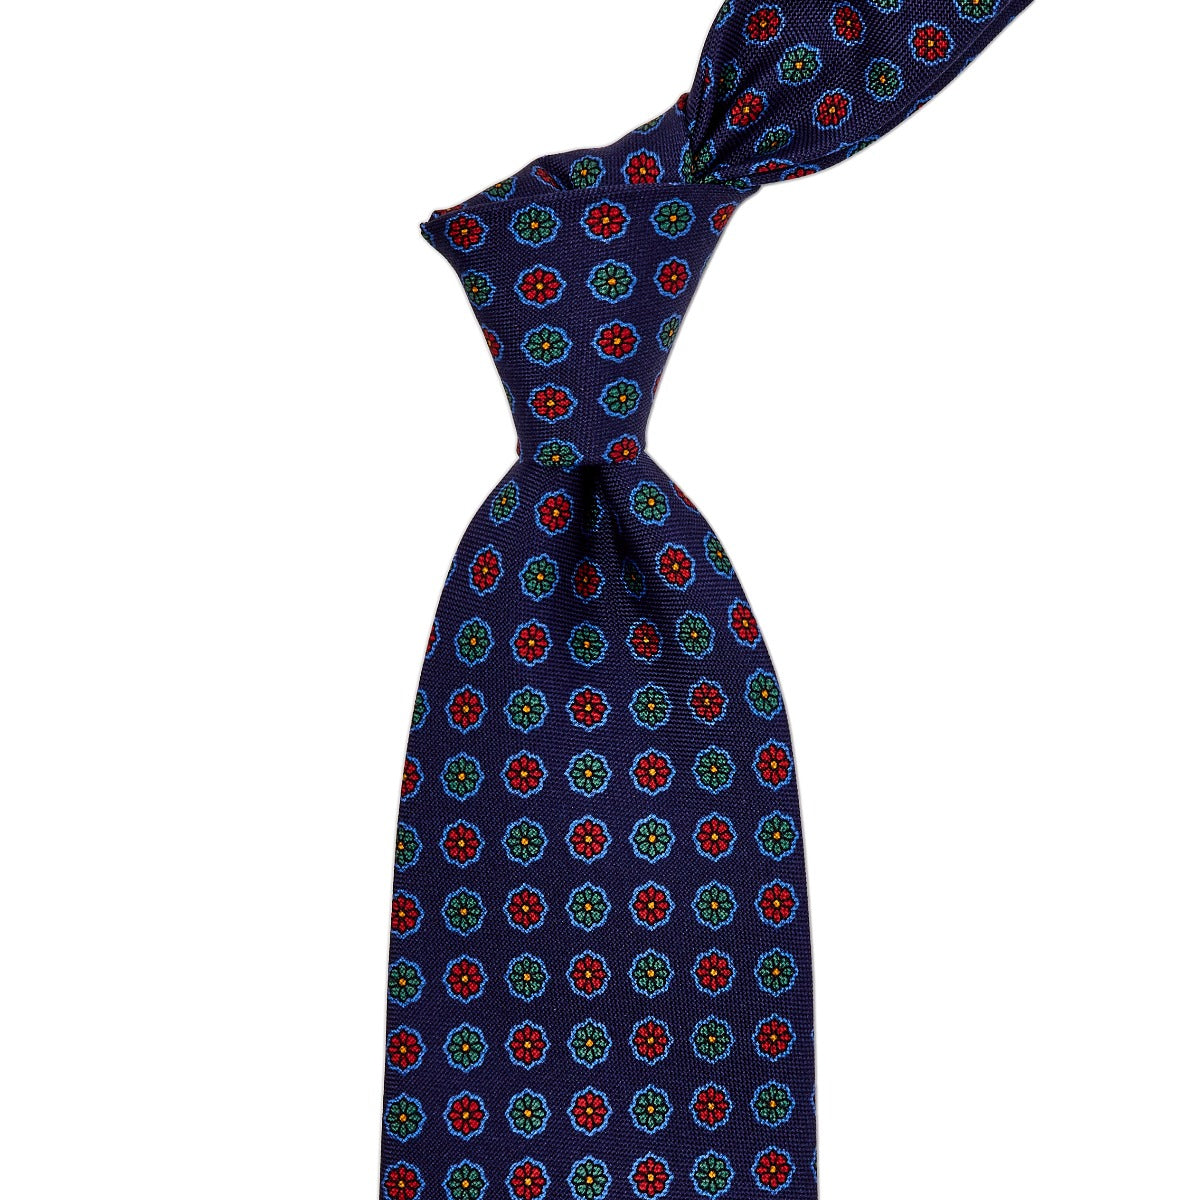 A Sovereign Grade Red Floral 25 oz Hopsack Silk Tie with circular patterns on a blue background, sold by KirbyAllison.com.